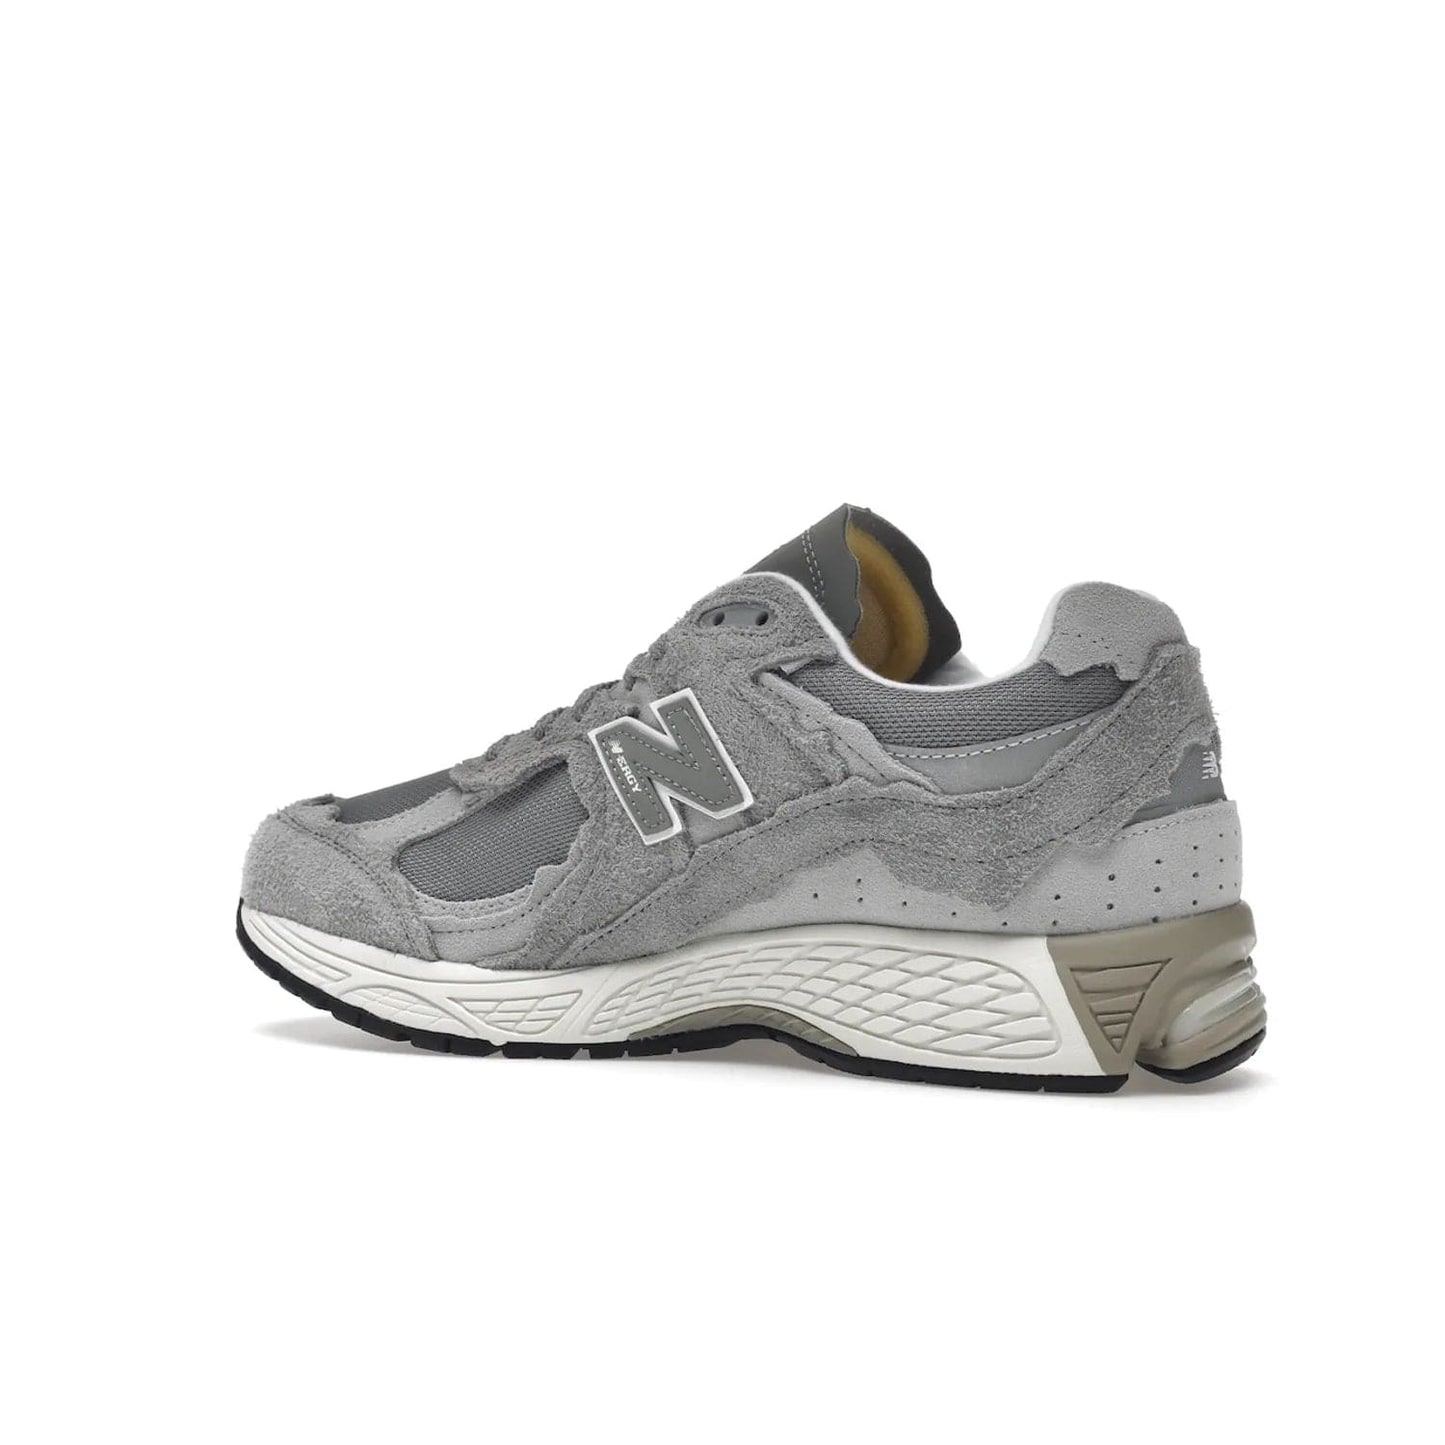 New Balance 2002R Protection Pack Grey - Image 22 - Only at www.BallersClubKickz.com - The New Balance 2002R Protection Pack Grey provides superior protection and all-day comfort. It features a blend of synthetic and mesh materials, foam midsole, rubber outsole, and a toe cap and heel counter. Show off the classic "N" logo and "2002R" lettering. Get a pair on February 14, 2023 for protection and style.